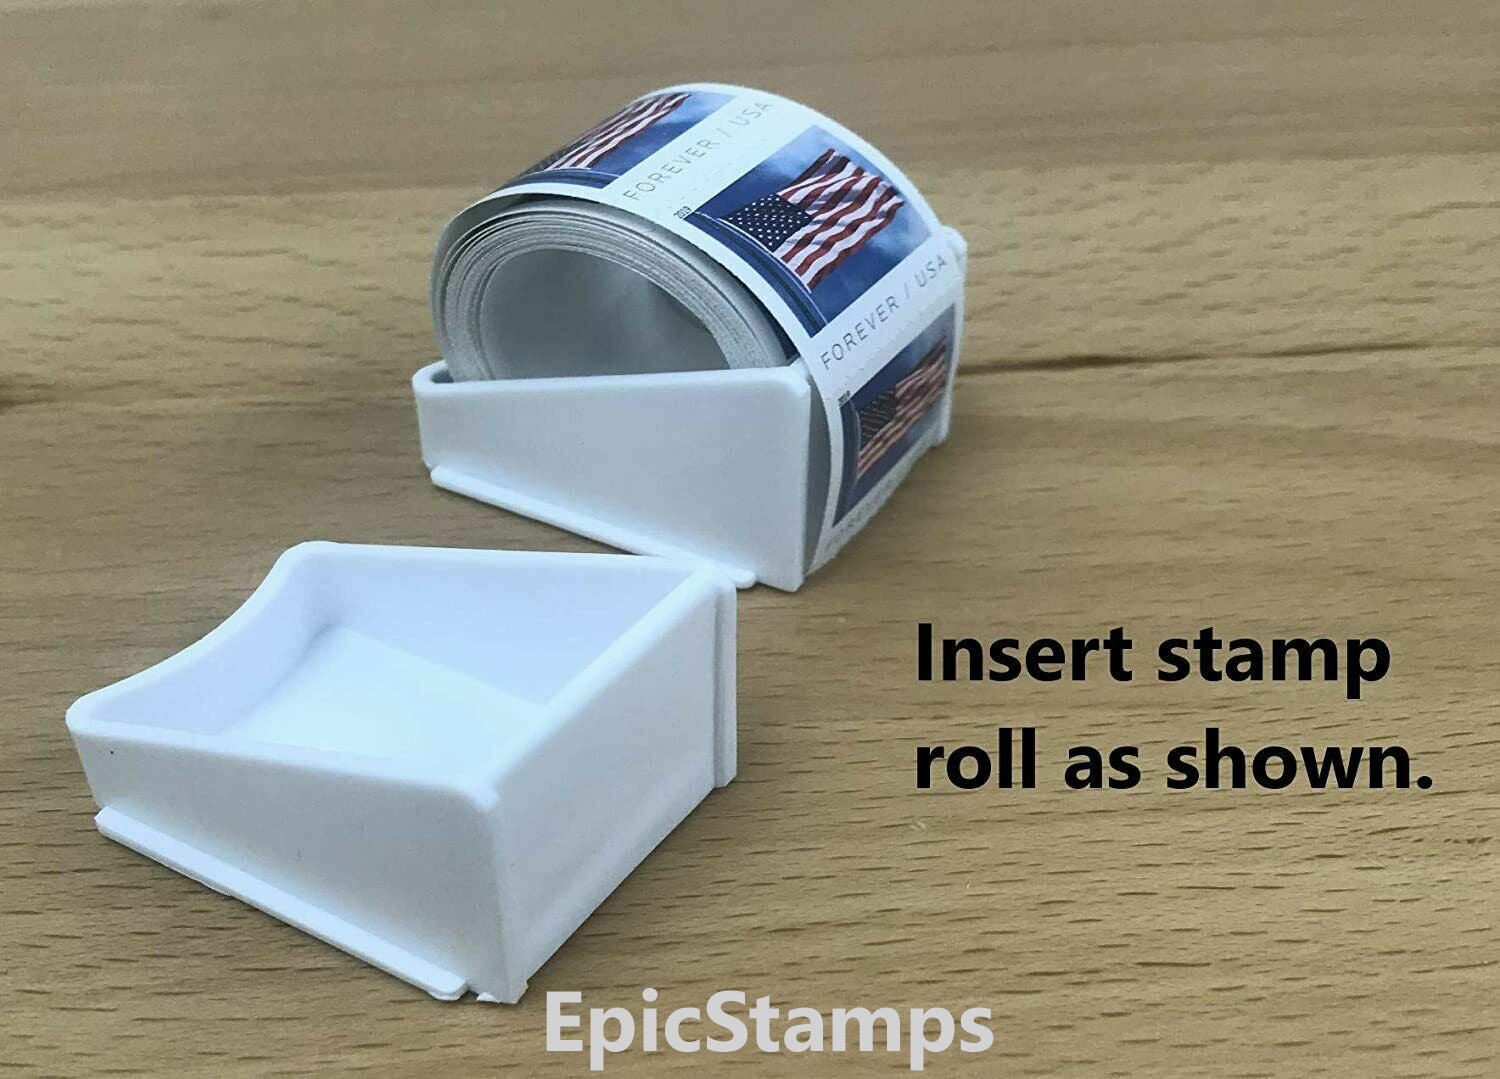 Buy Postage Stamp Dispenser for a Roll of 100 Stamps, Lightweight Iron can  Stamp Roll Holder for US Forever Stamps is Compact and Impact-Resistant for  Desk Organization of Home Office Supplies Online